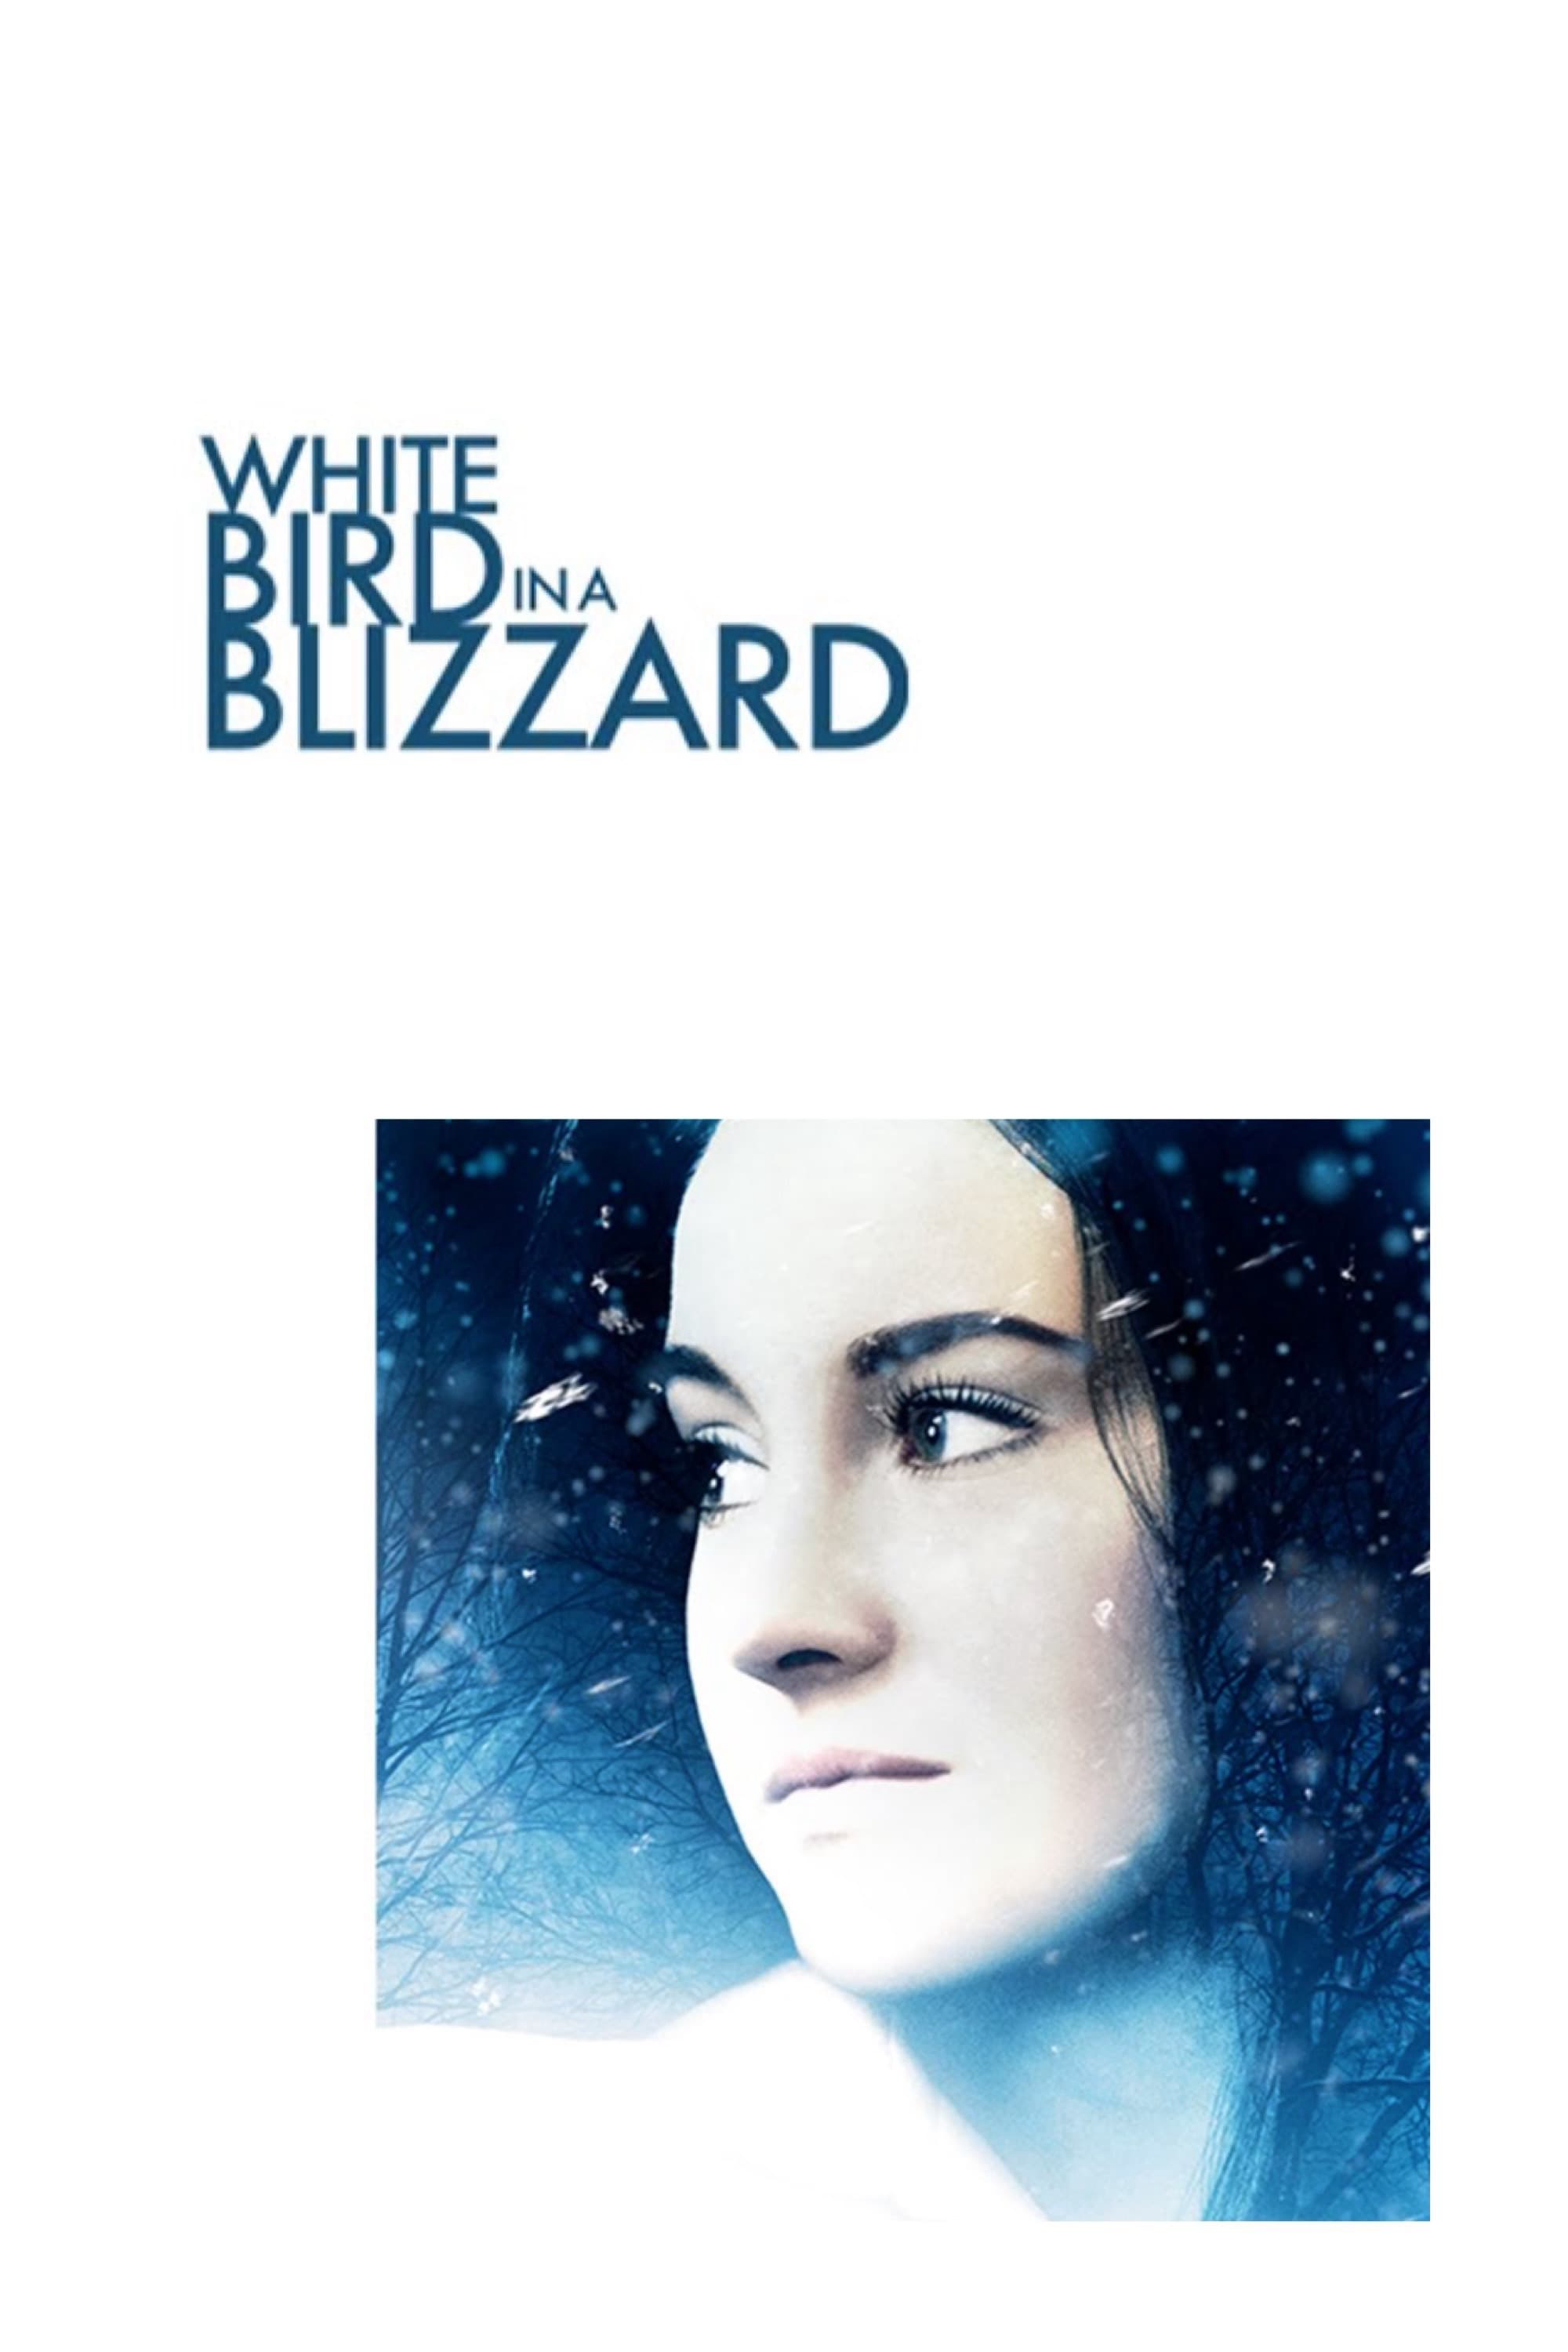 Poster Phim Chim Trắng Giữa Bão Tuyết (White Bird in a Blizzard)